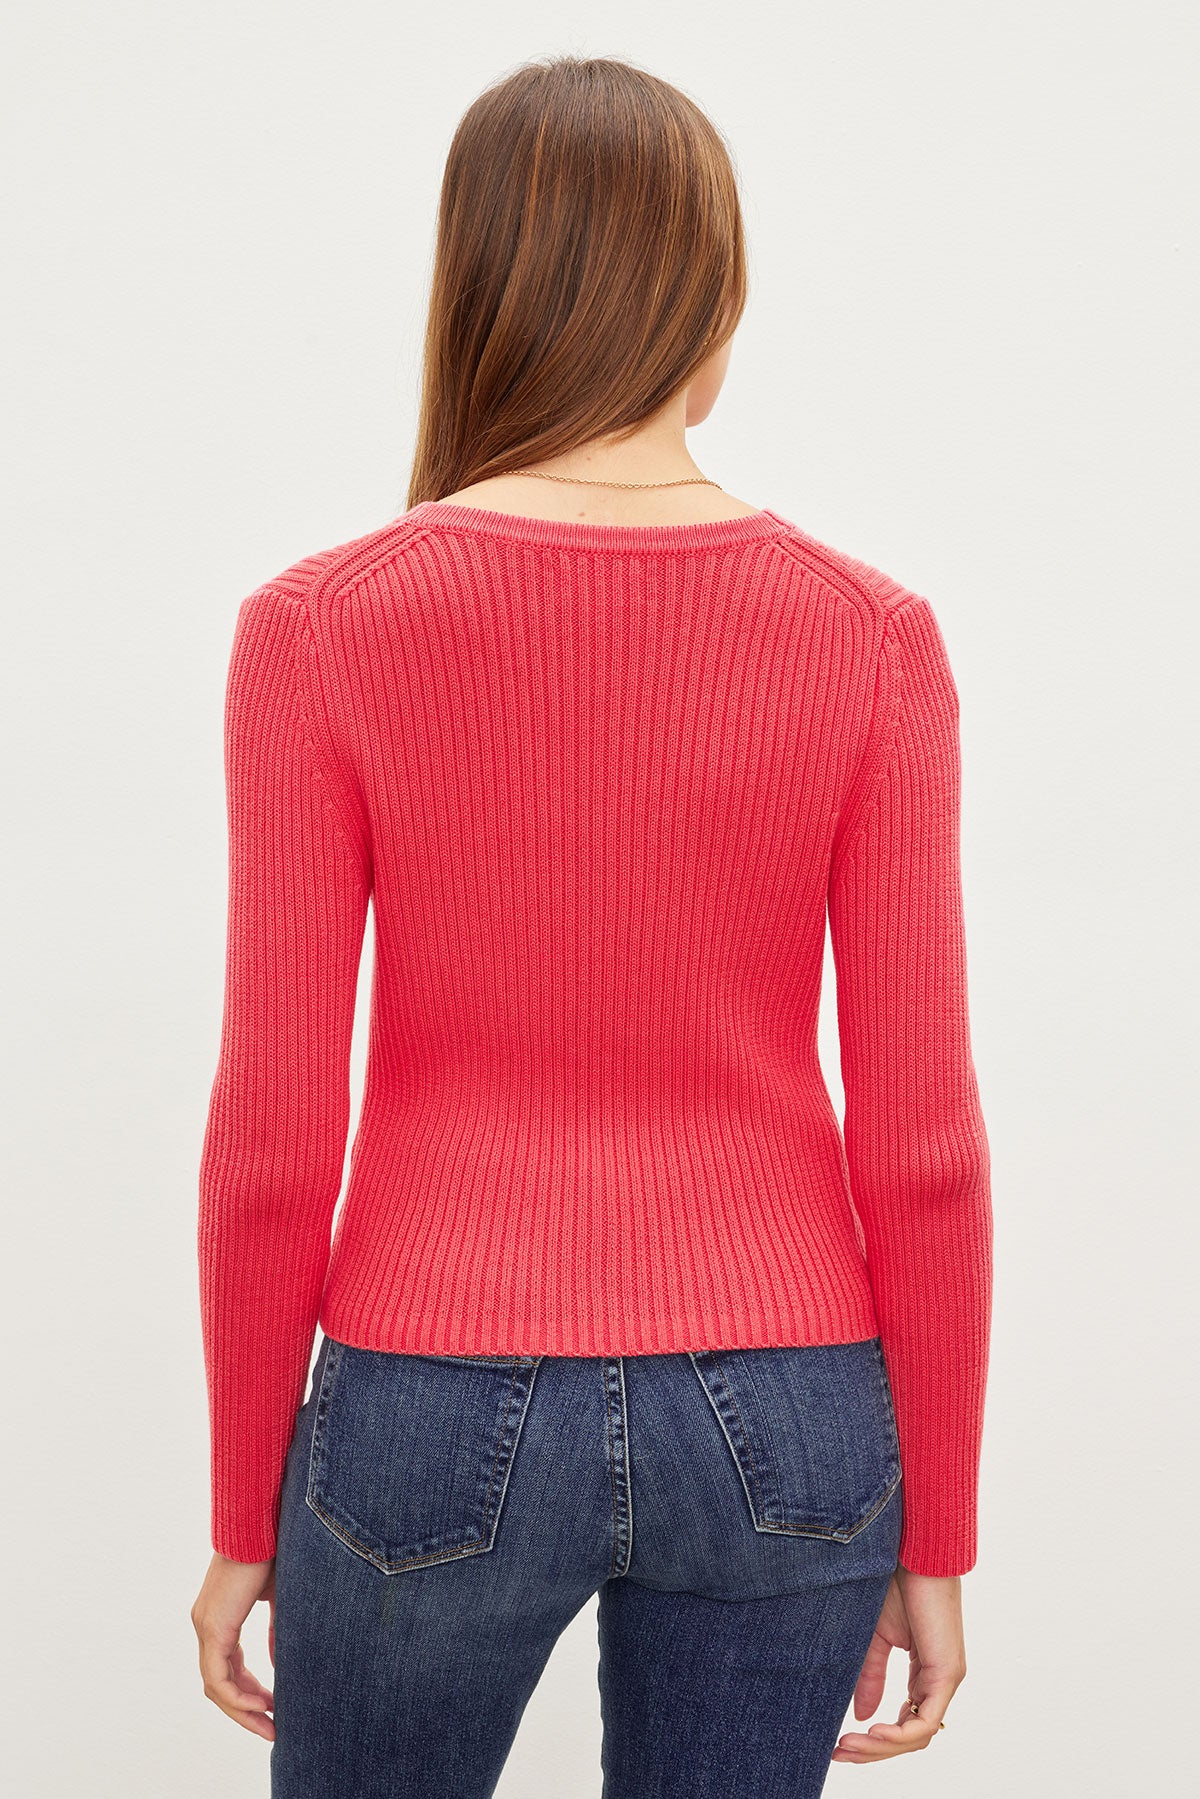 Woman standing with her back to the camera, wearing a red cotton ribbed knit HYDIE BUTTON FRONT CARDIGAN by Velvet by Graham & Spencer and blue jeans against a plain background.-36387940434113